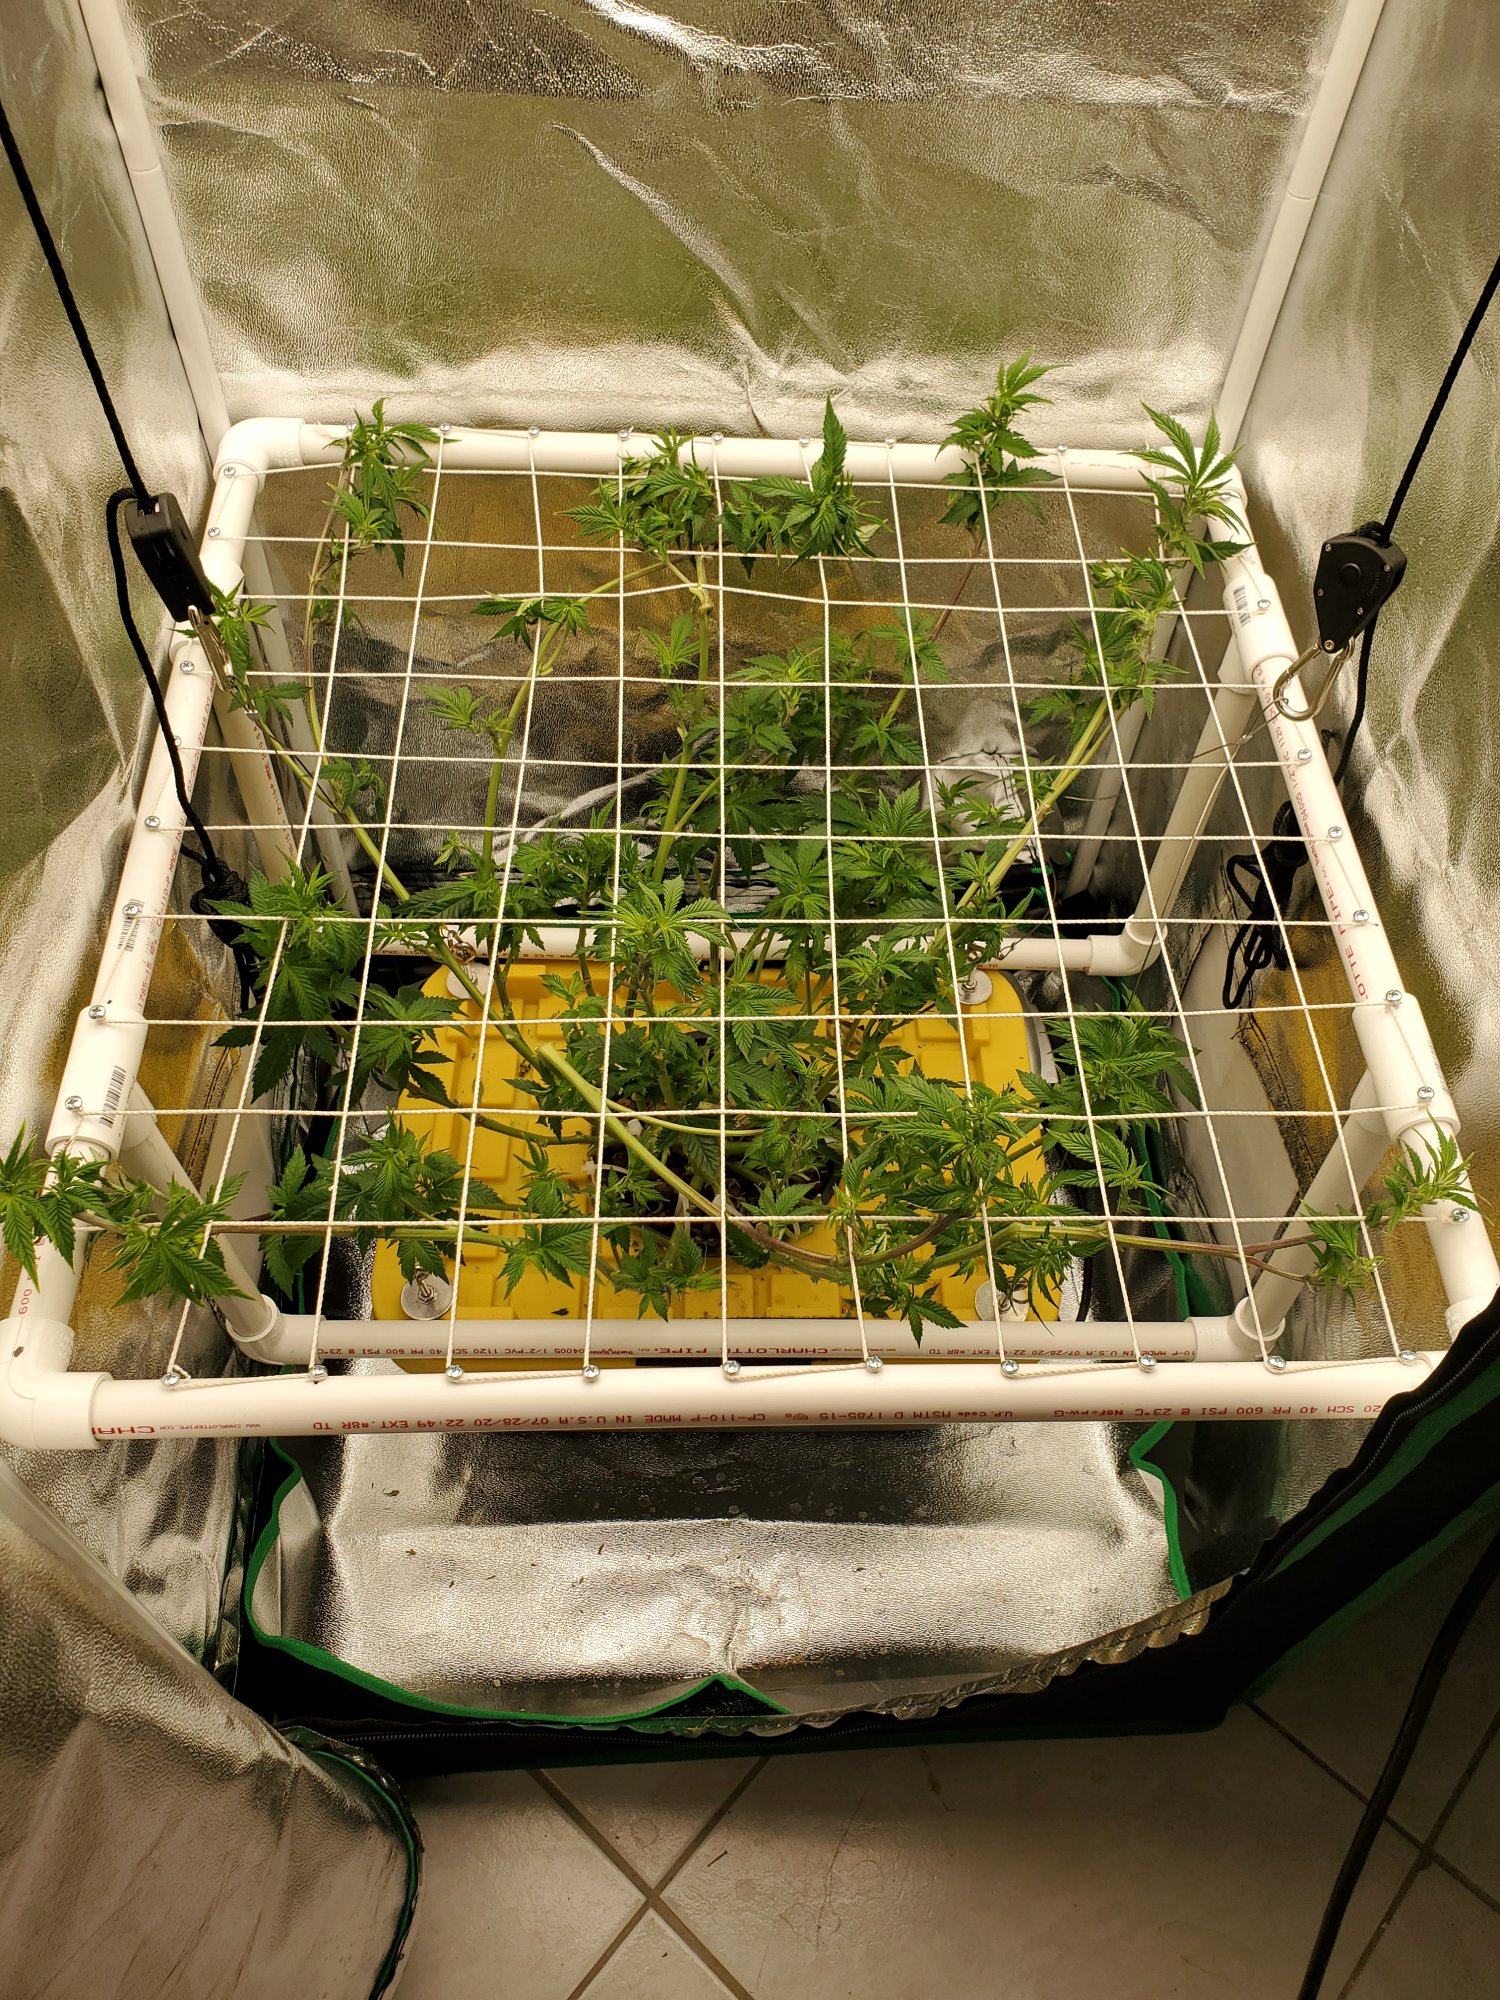 Round 2 clones for funzies going to strip the helloutta this grow 4